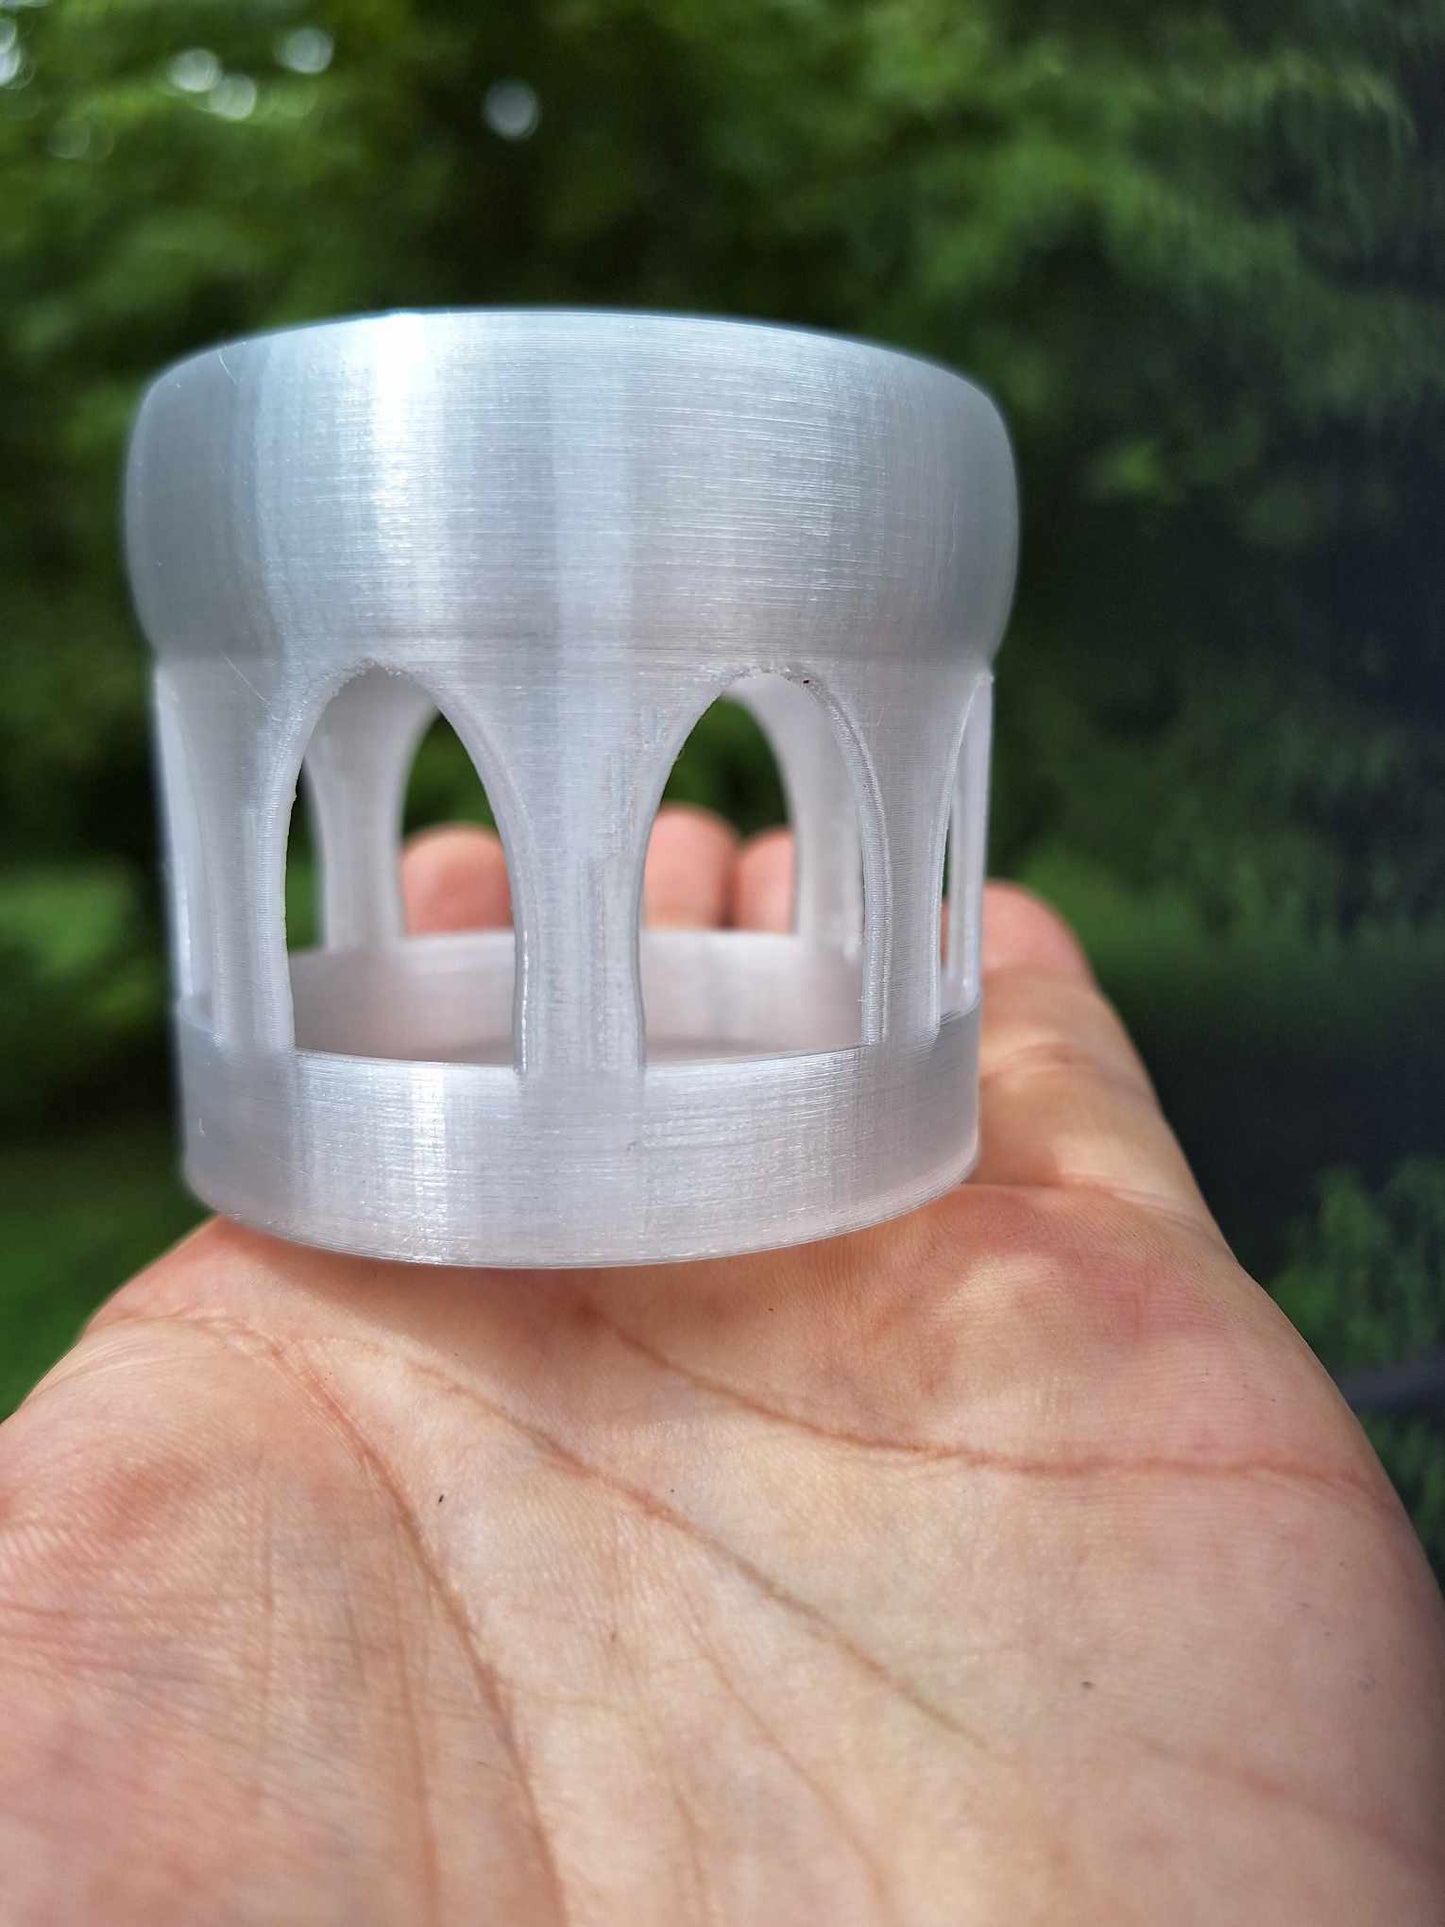 A hand holding a translucent Floating Shrimp Gazebo Feeder by Cassie's Critters & Creations, 3D-printed in Overture Translucent PETG, showcasing its sleek design and clarity against a natural outdoor backdrop.